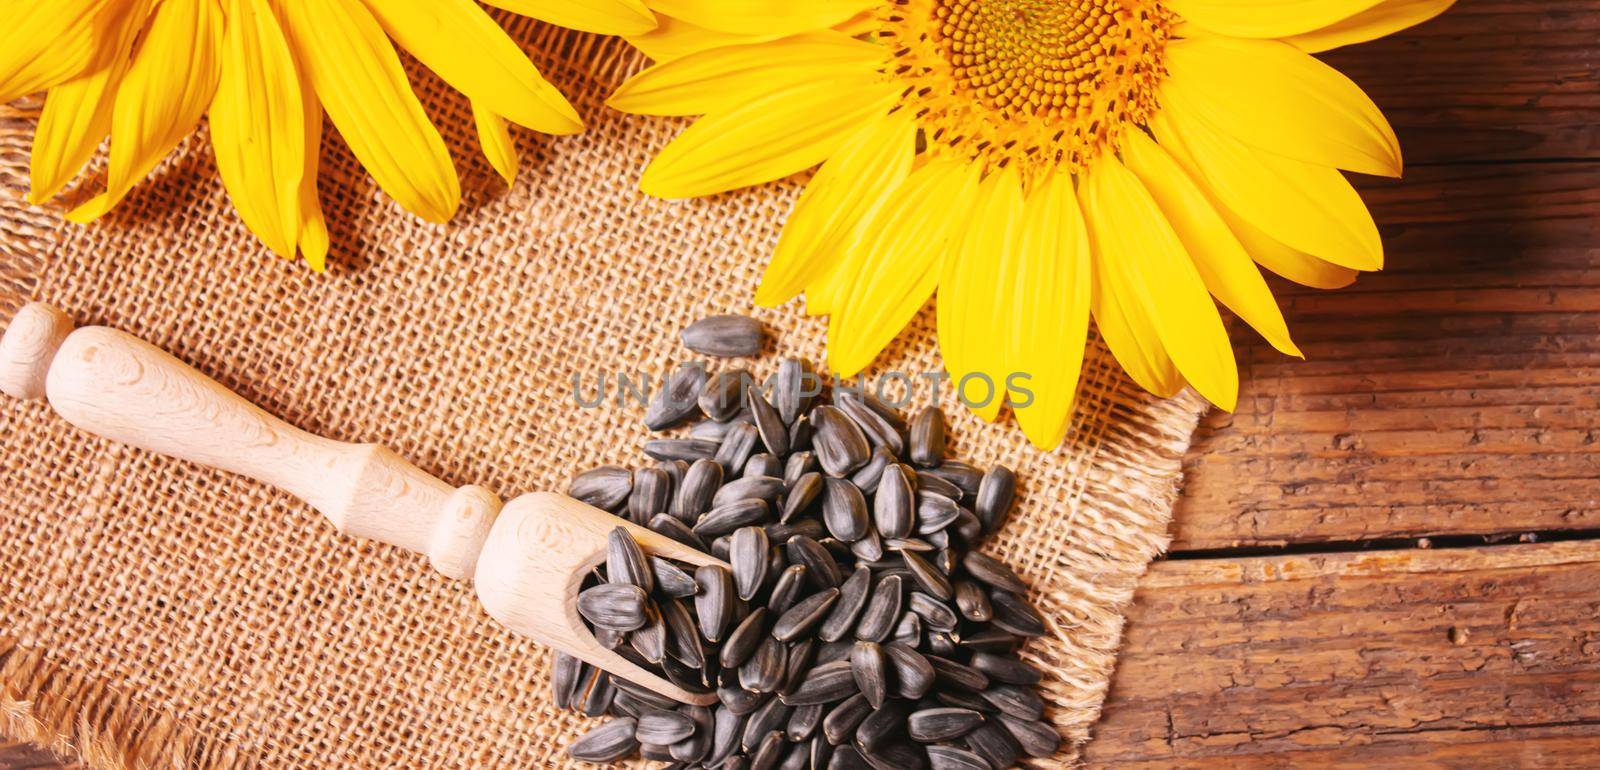 Sunflower seeds and oil bottle on old wooden background. Selective focus by mila1784